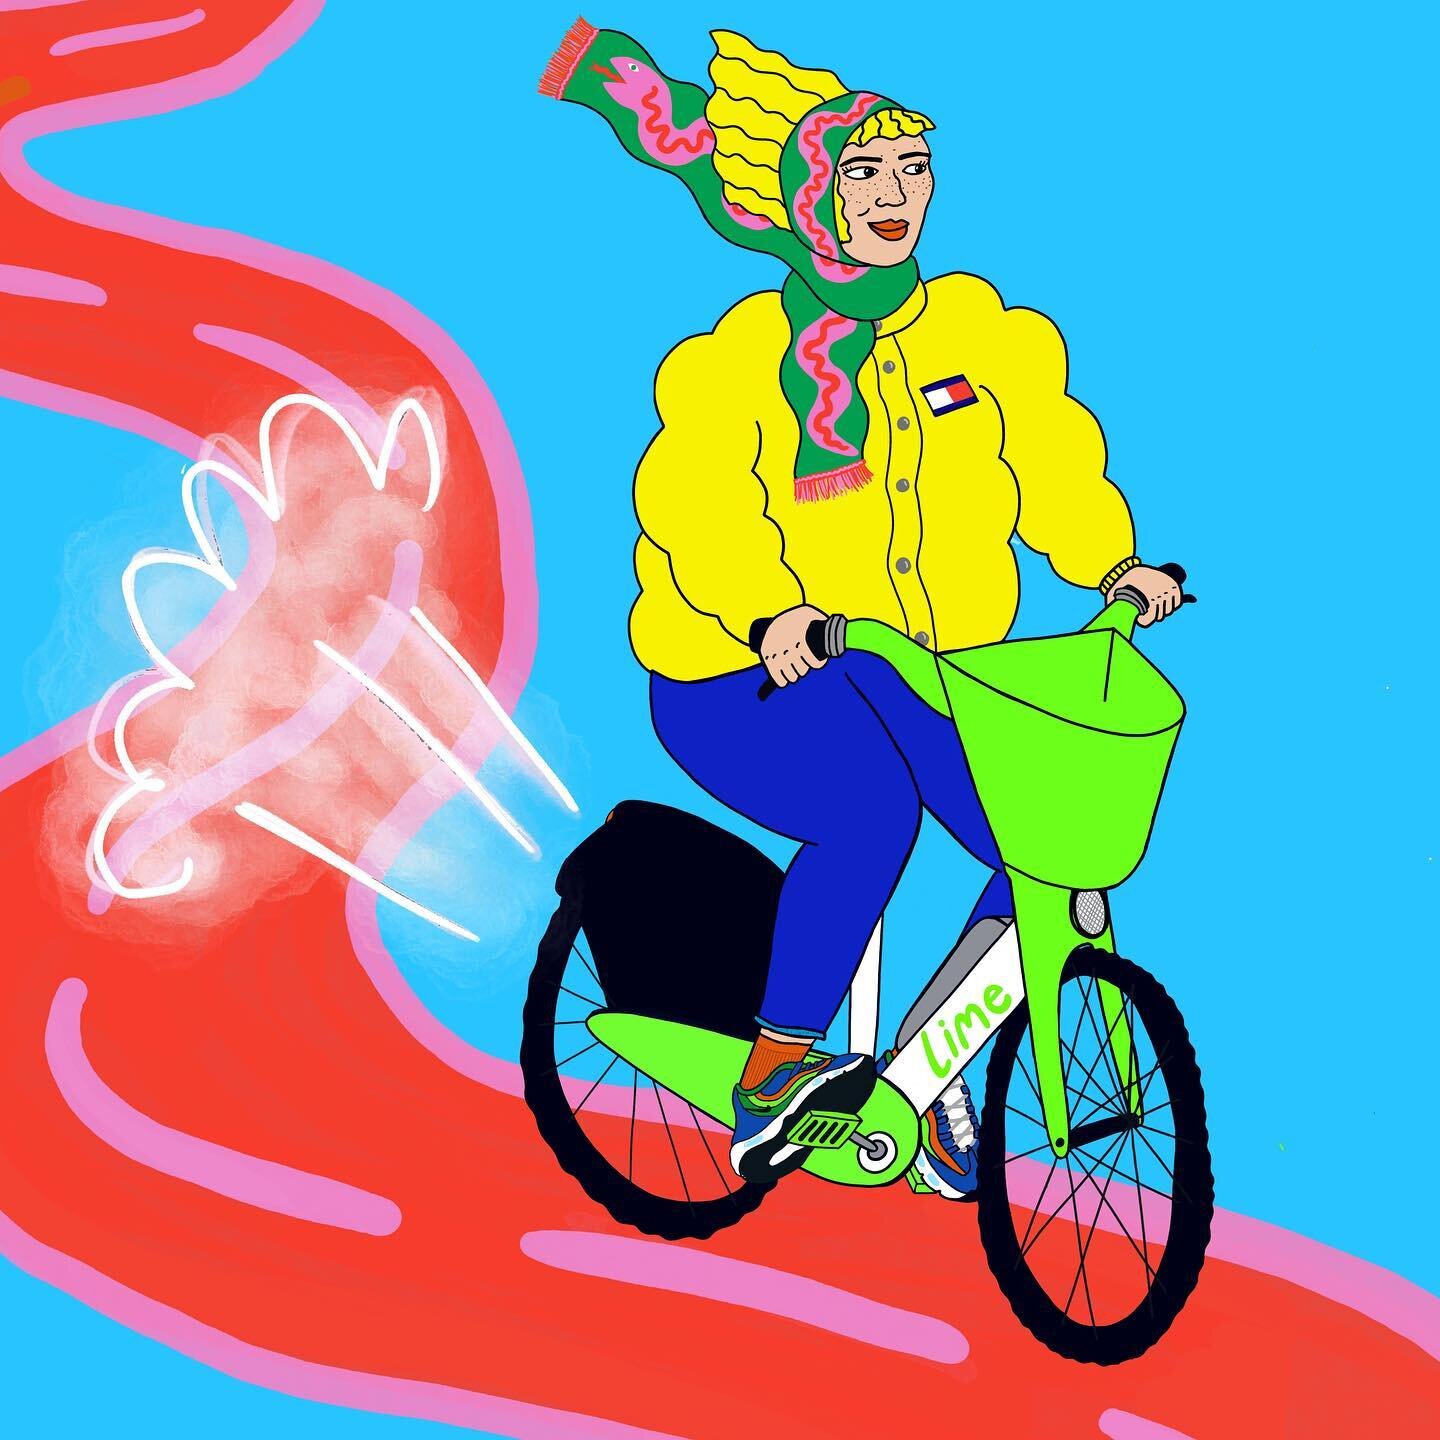 When the best part of the date is hopping on a @lime bike &amp; zooming off home, alone 😅💚💨 

This drawing may or may not be inspired by real life events 😂